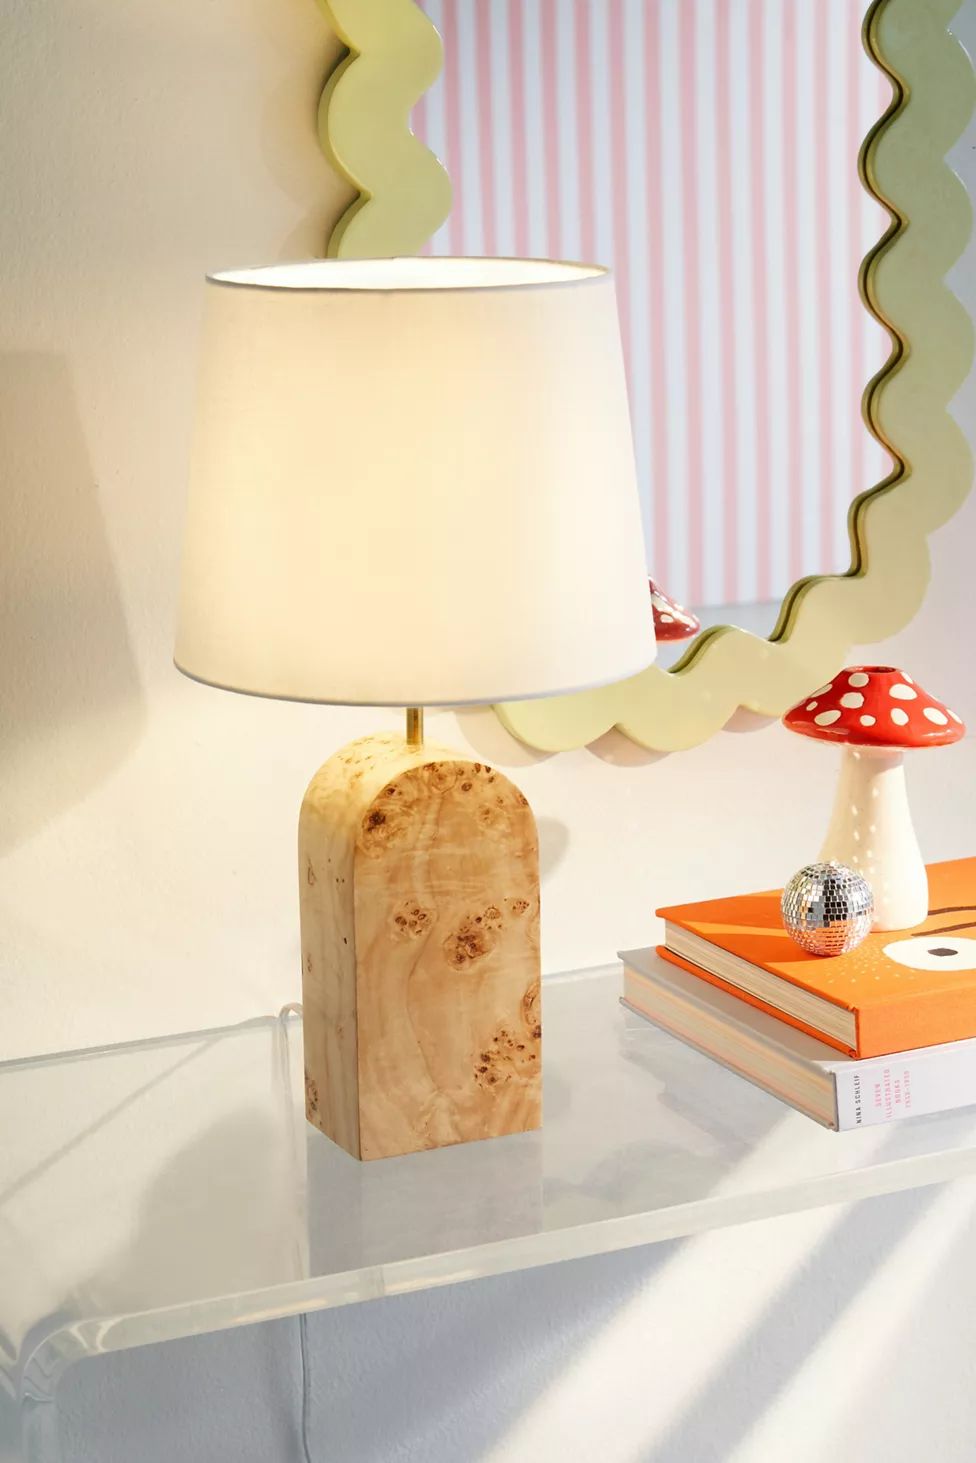 Burl Wood Table Lamp | Urban Outfitters (US and RoW)